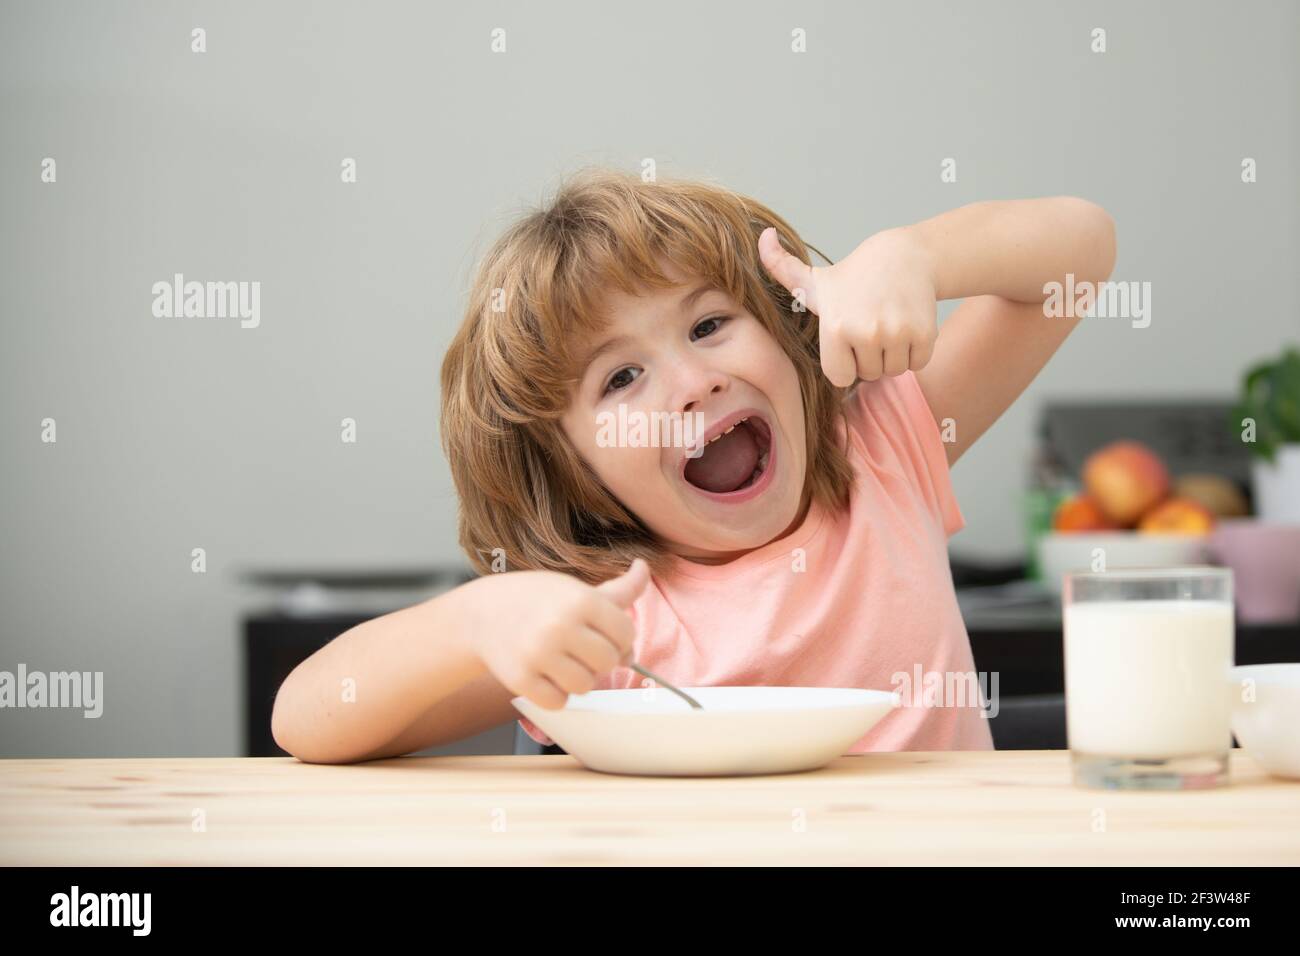 Healthy nutrition for kids. Caucasian toddler child boy eating healthy soup in the kitchen. Stock Photo